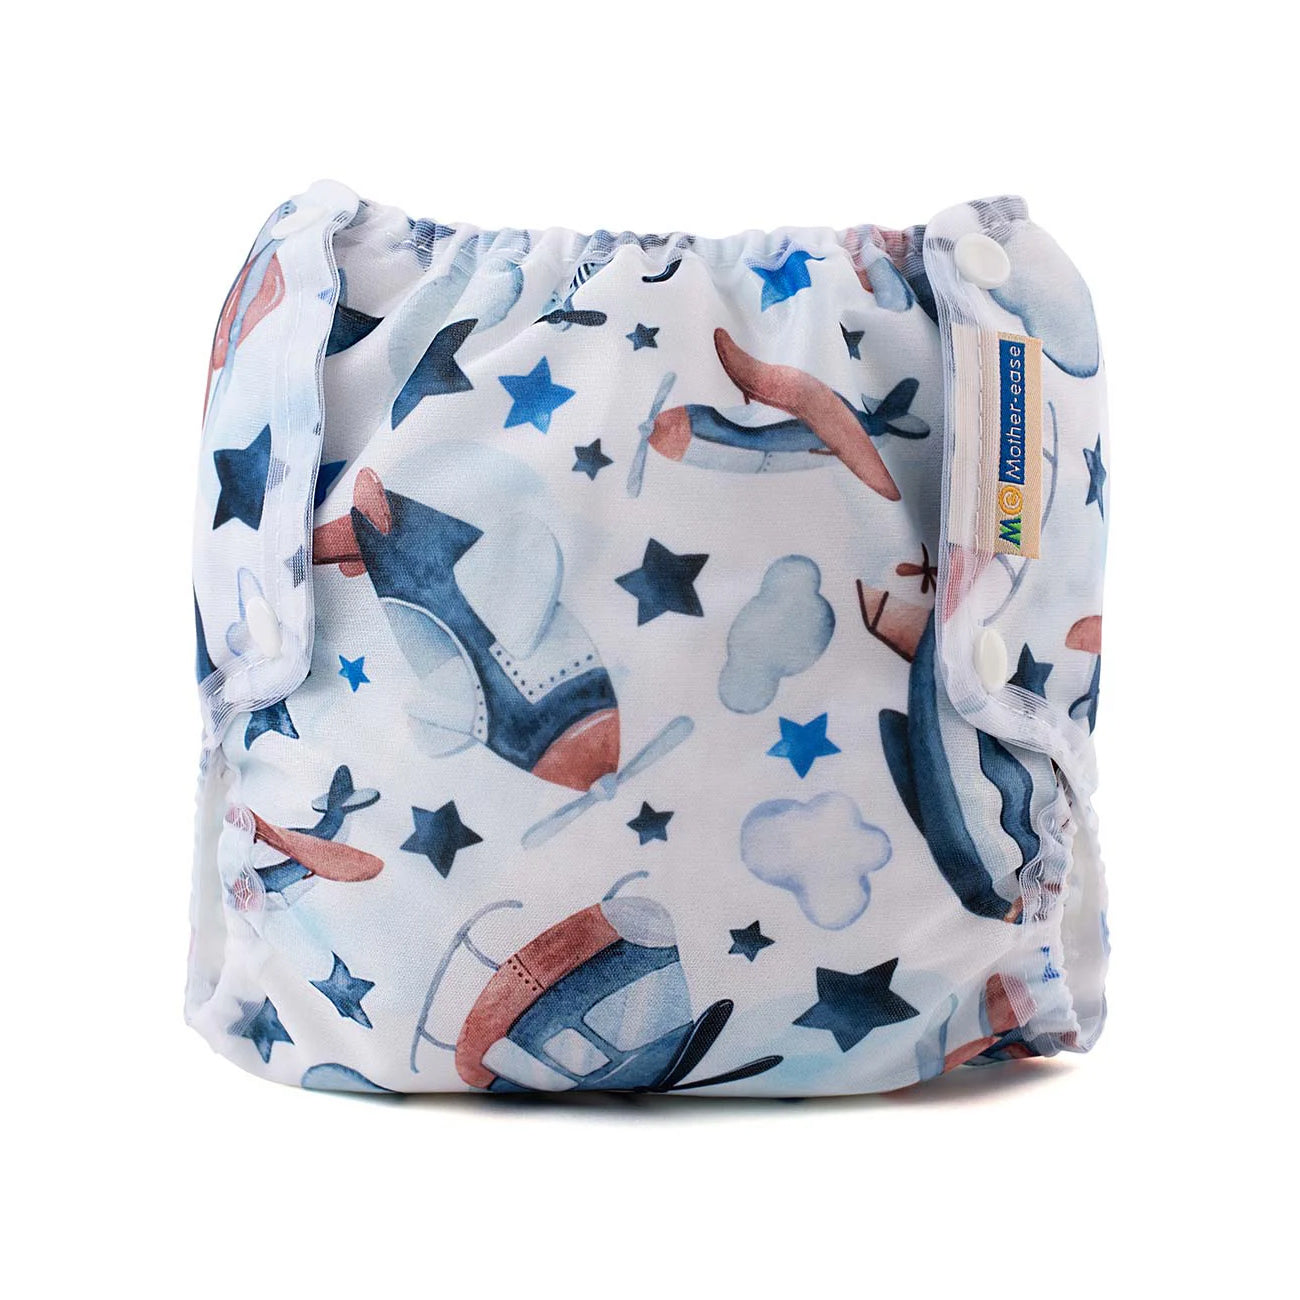 Mother-ease Air Flow Cover Newborn flight airplane print